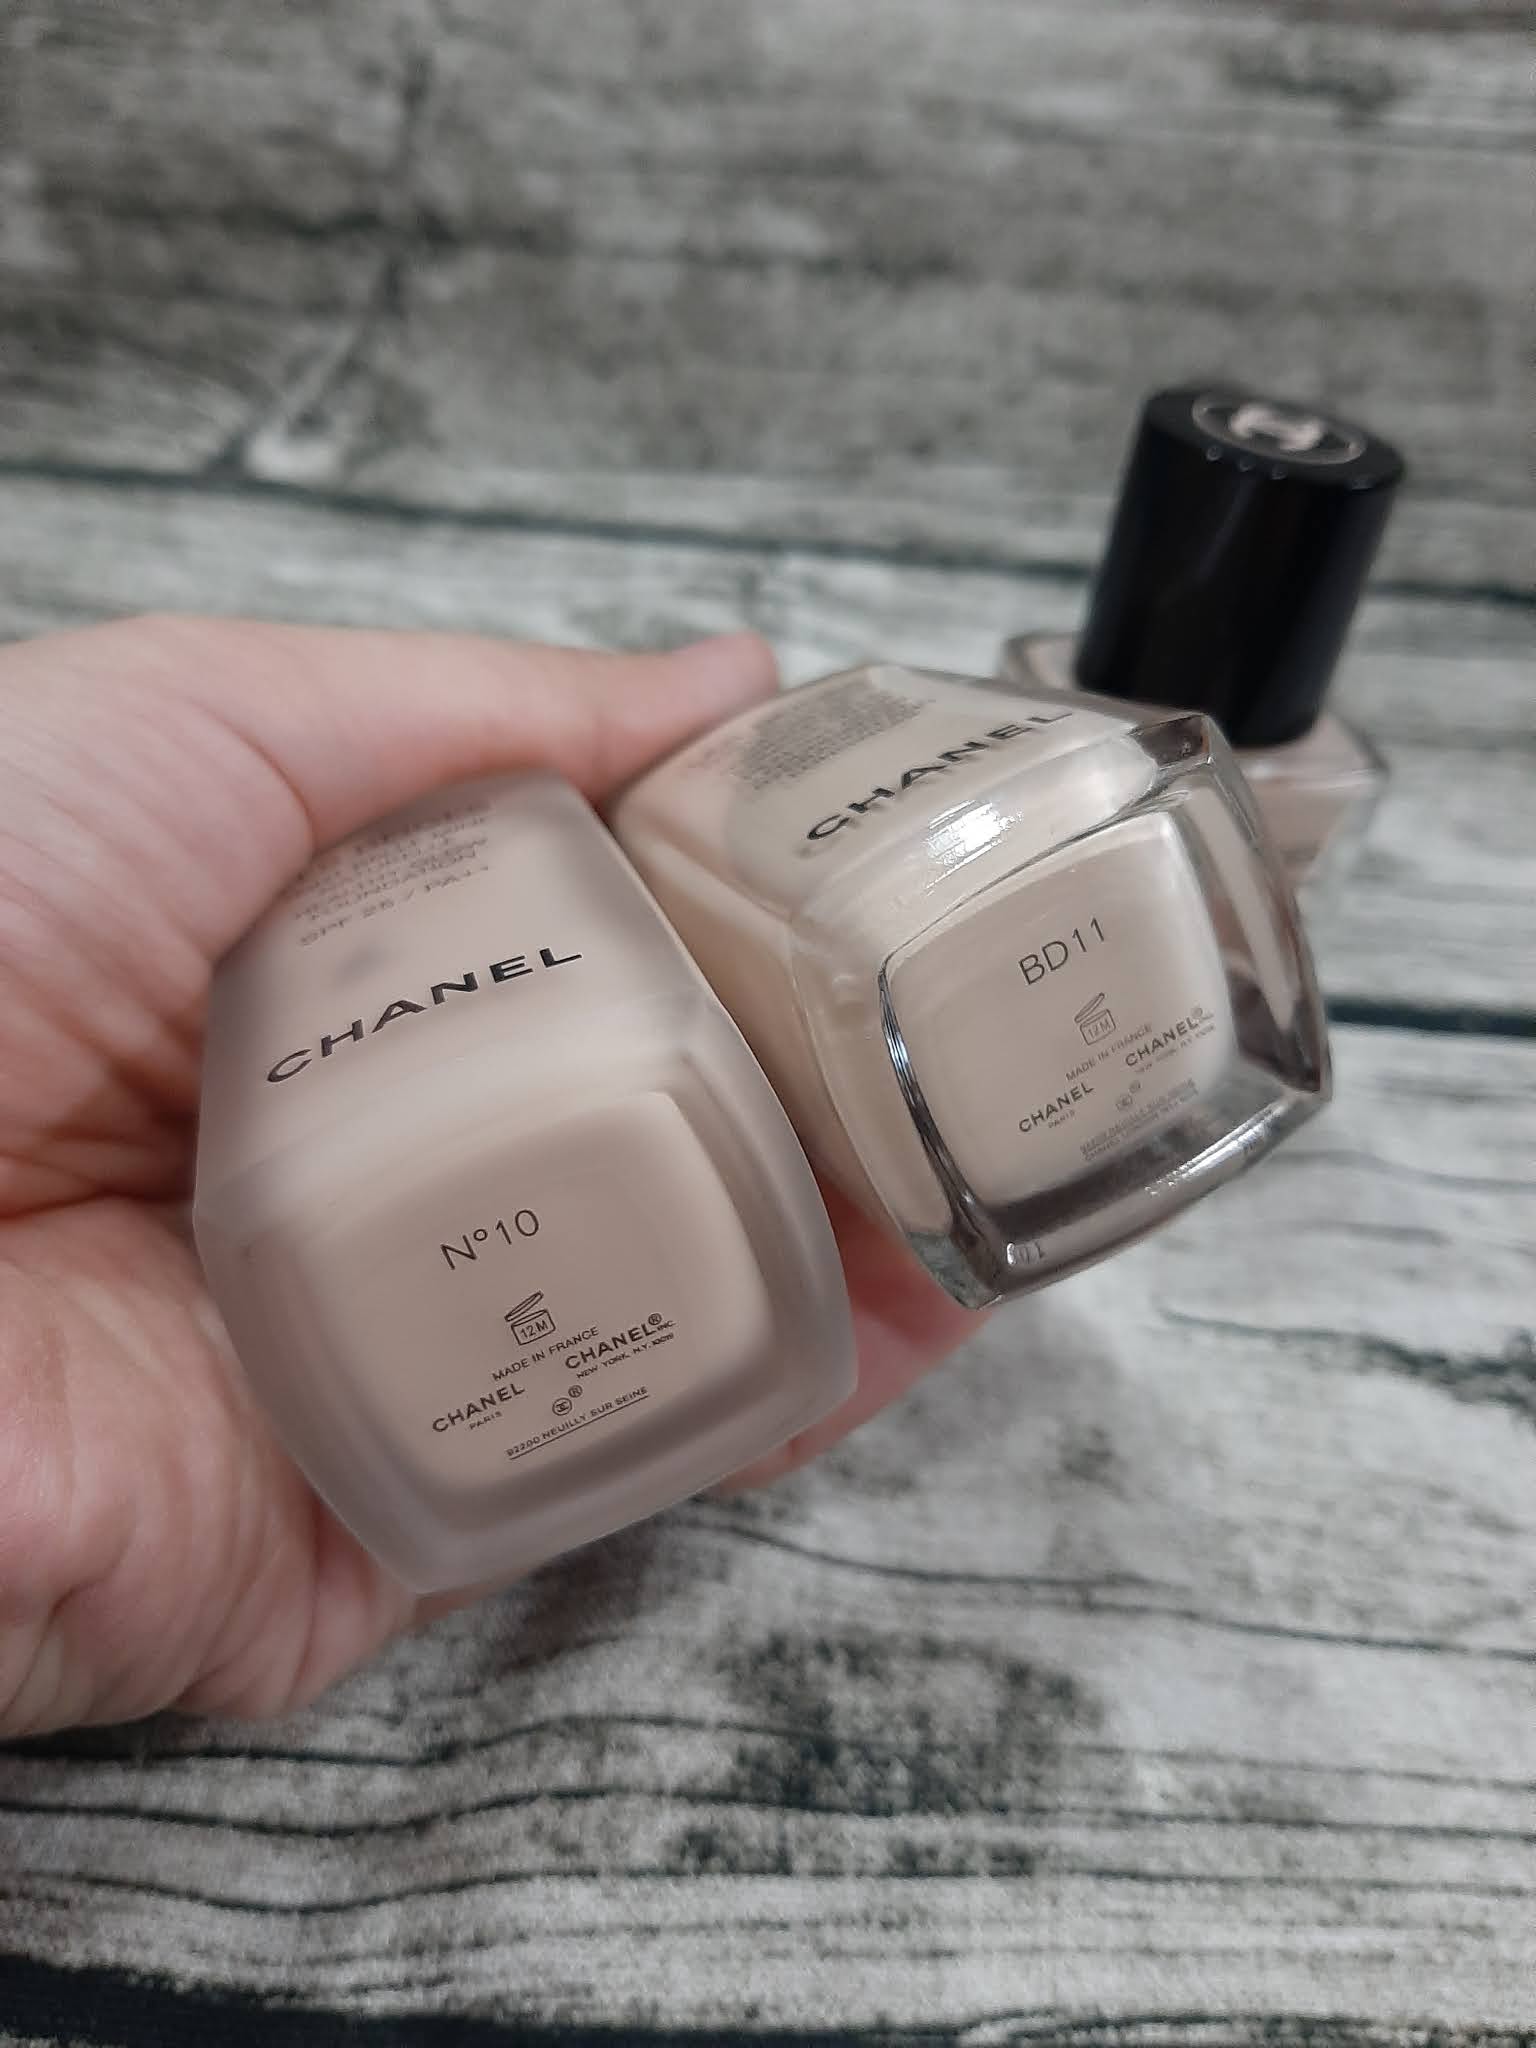 All About That Base: Chanel Les Beiges Healthy Glow Foundation